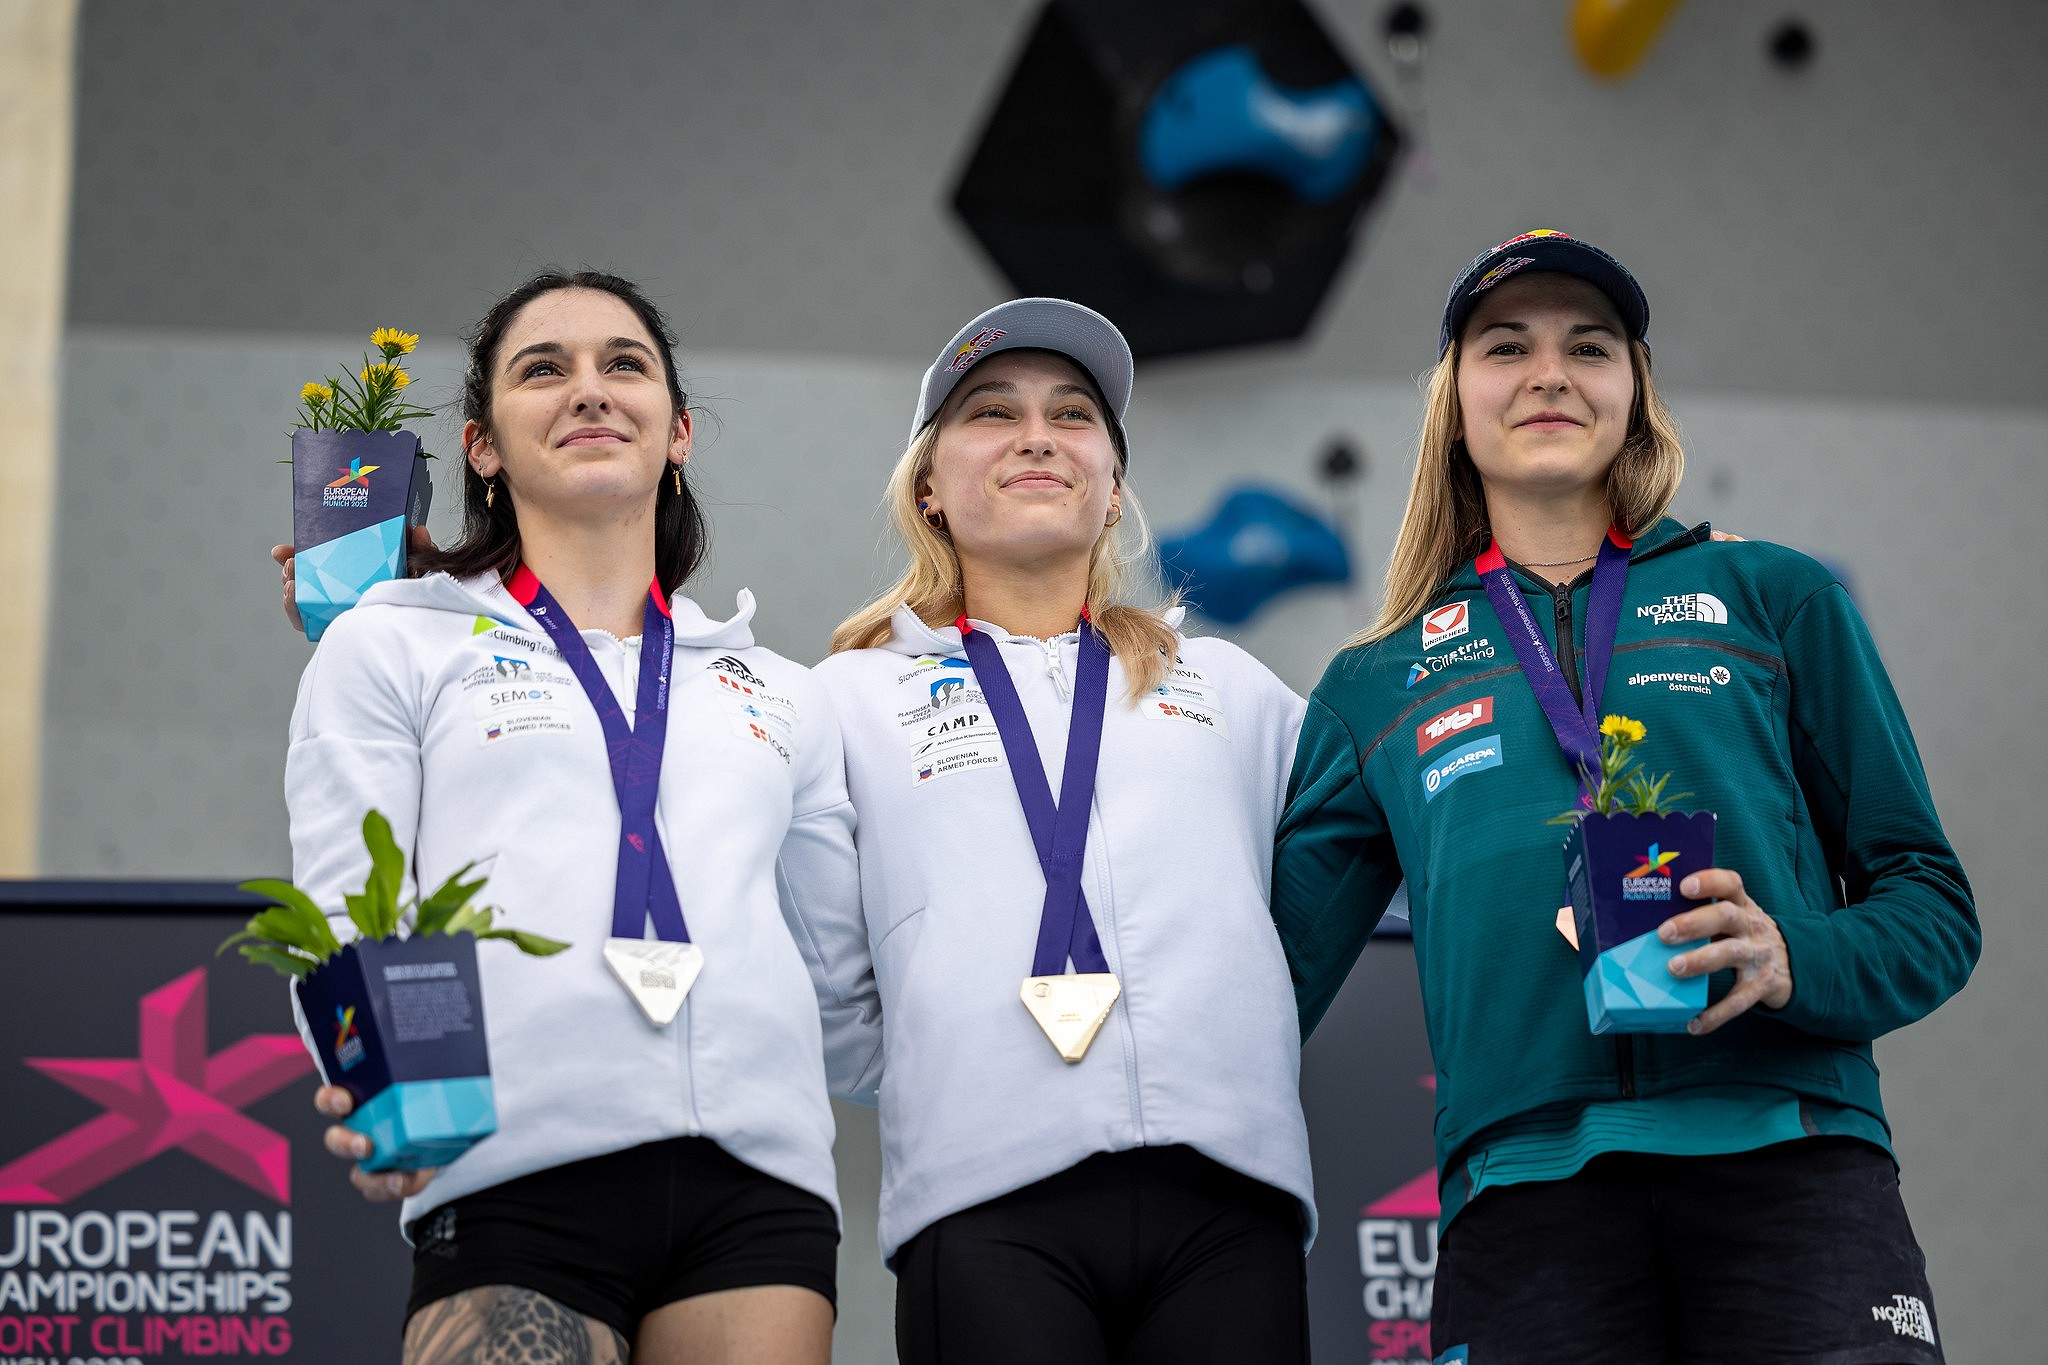 Janja Garnbret (SLO) earns her third gold of the competition in Combined, ahead of Mia Krampl (SLO) and Jessy Pilz (AUT).  © Jan Virt/IFSC